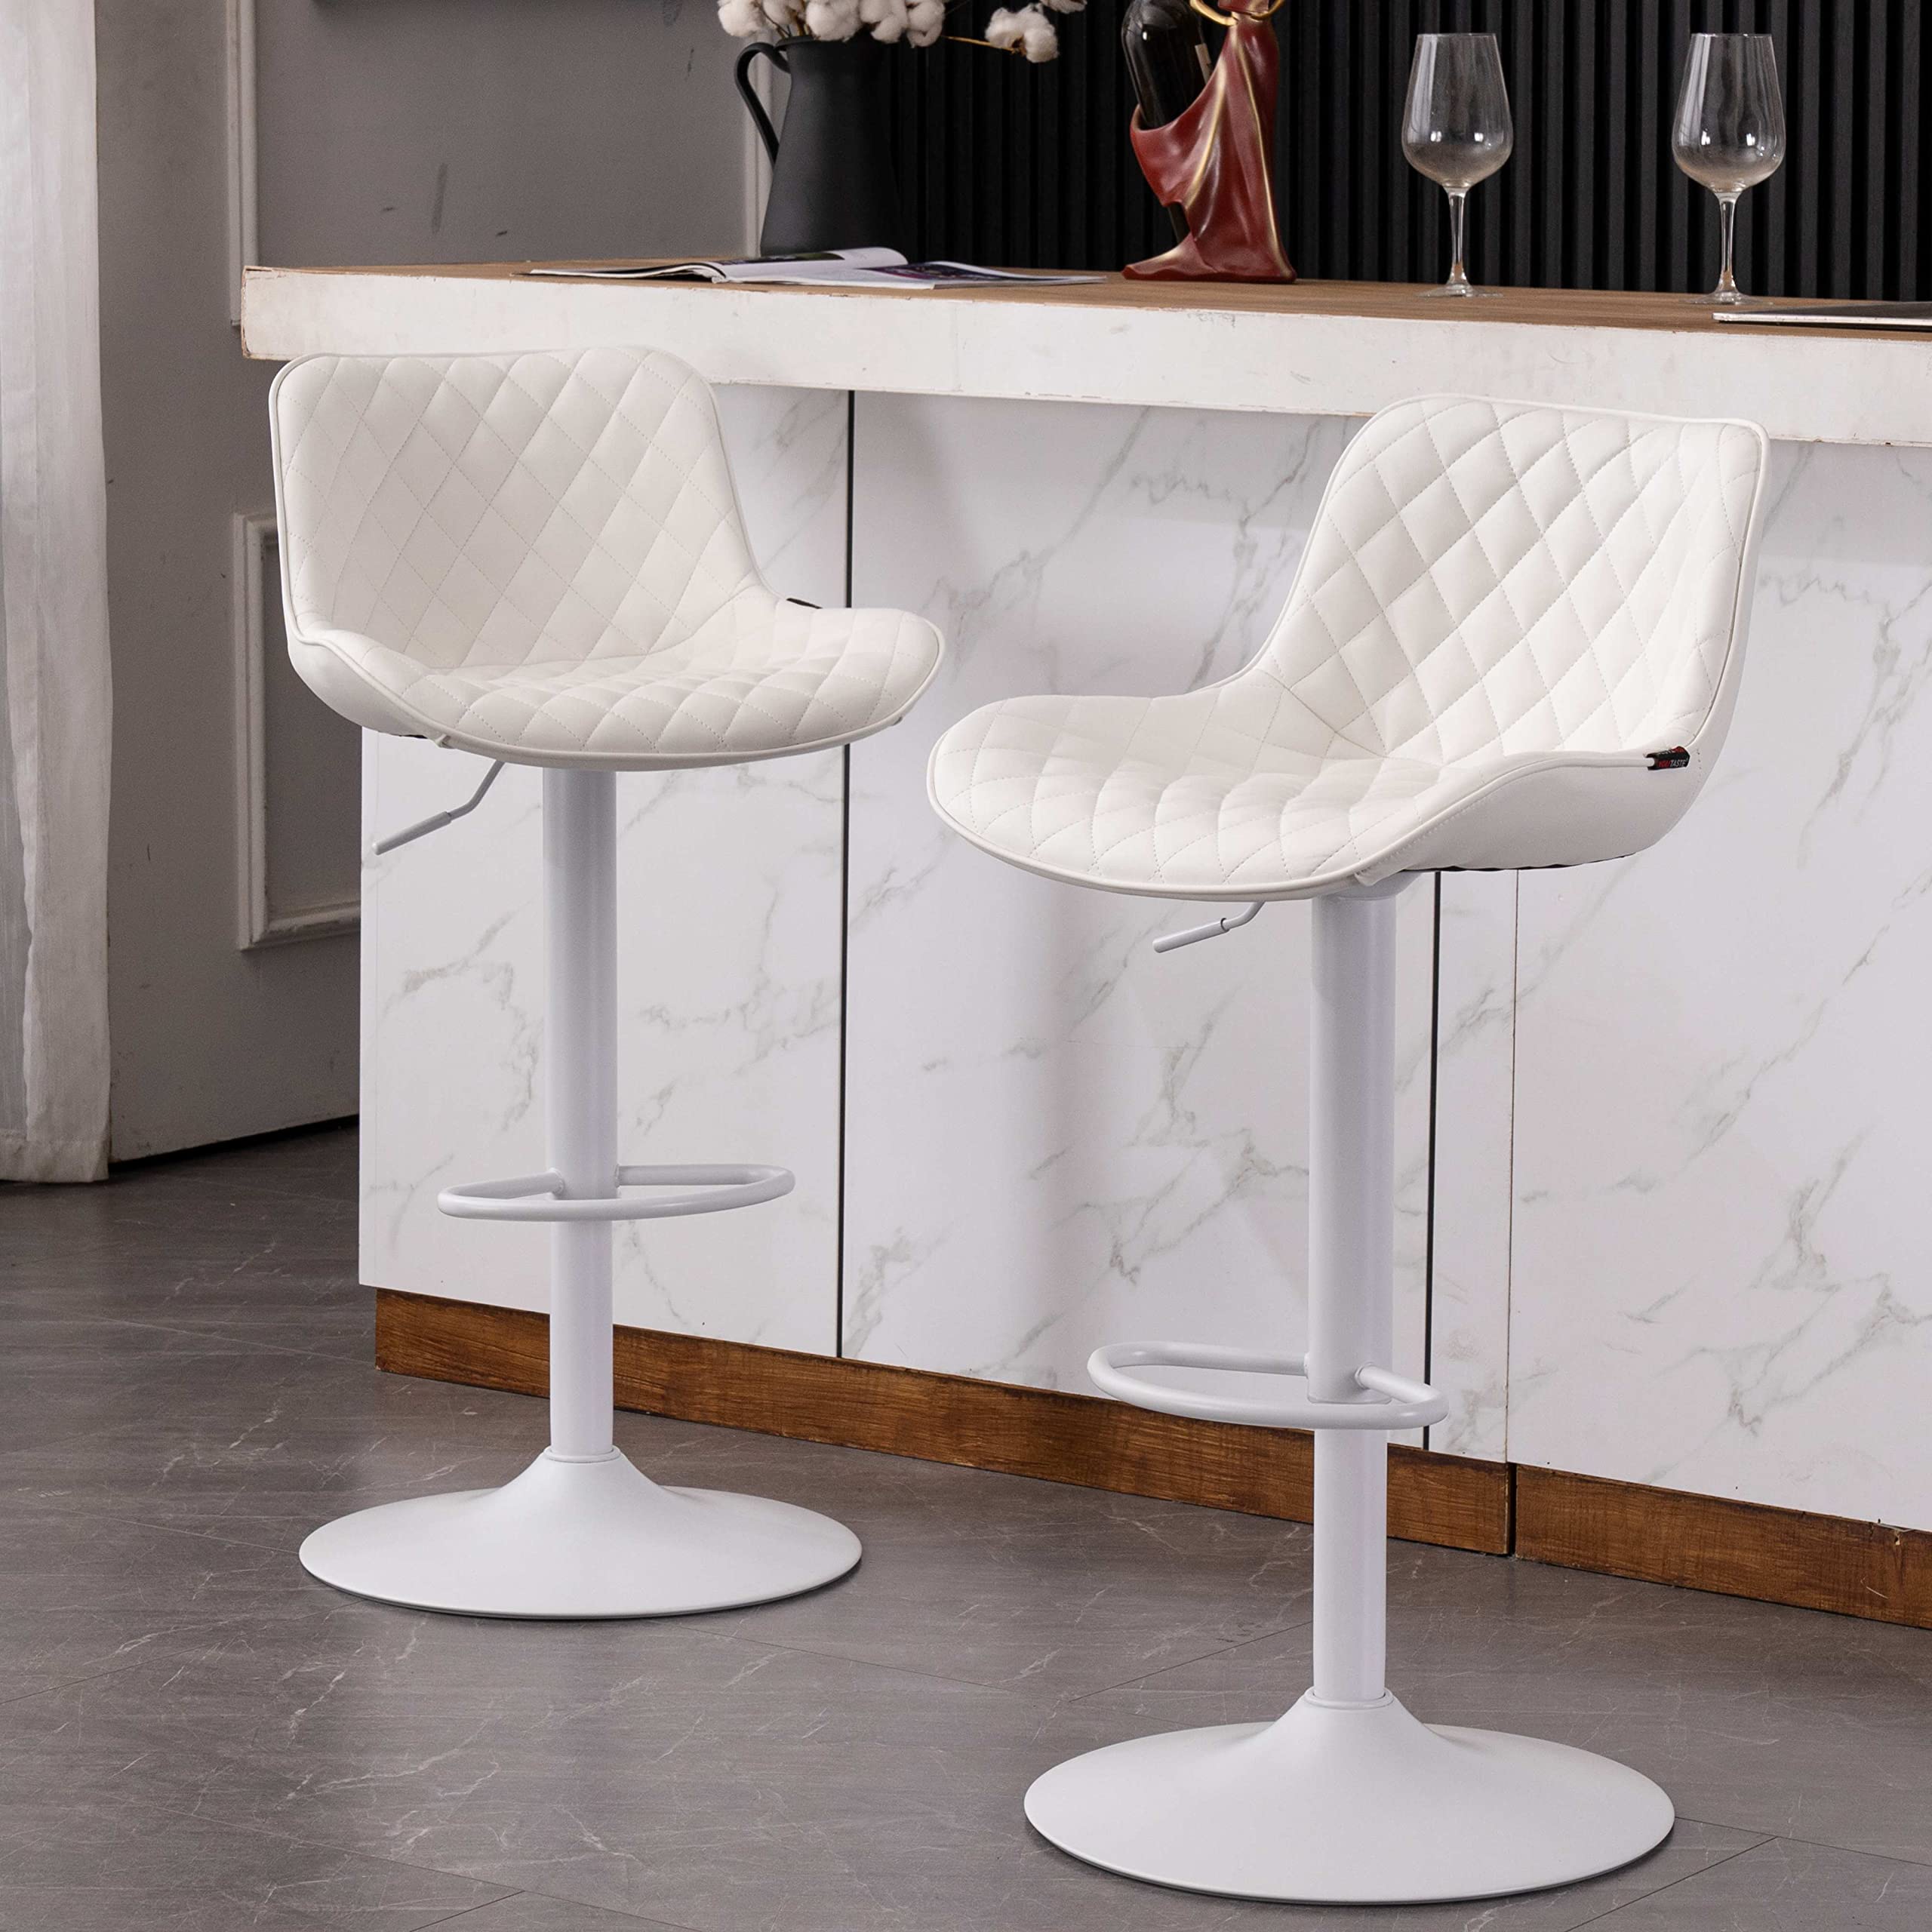 YOUTASTE White Bar Stools Set of 2 Faux Leather Padded counter Height Bar Stool Adjustable Metal Barstools High Back Swivel Bar